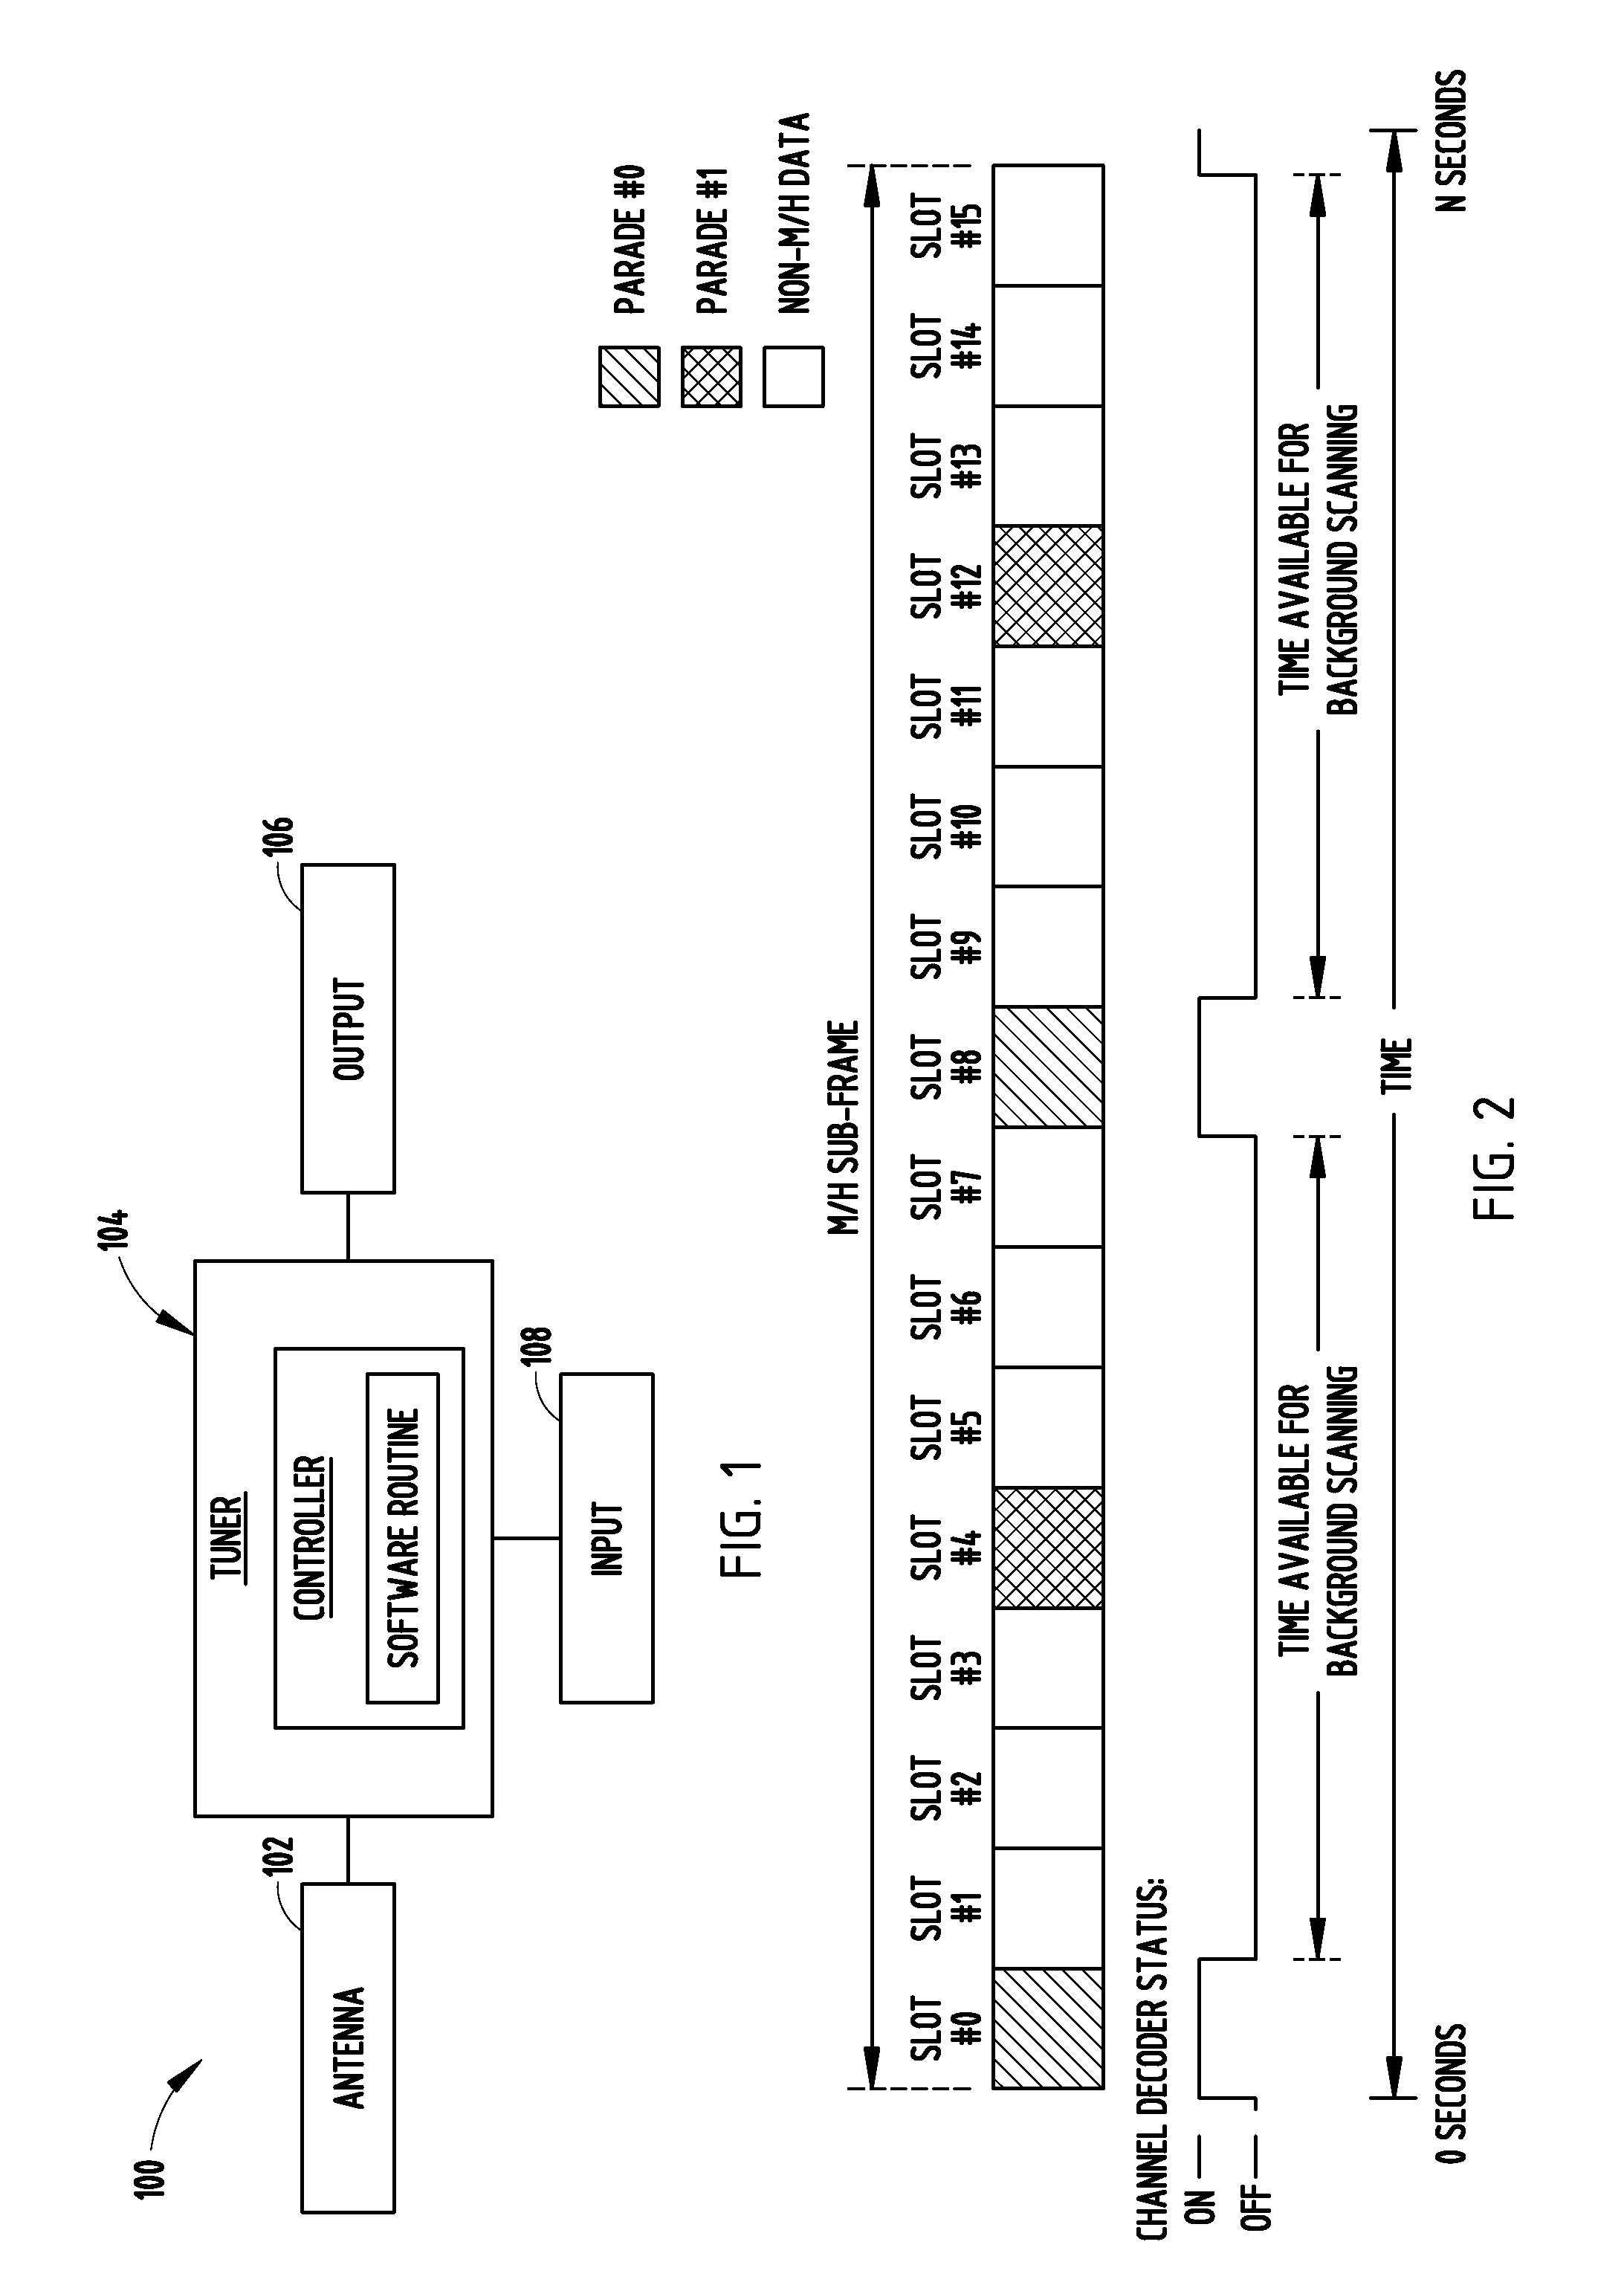 Receiver system and method of receiving a broadcast to provide a content output